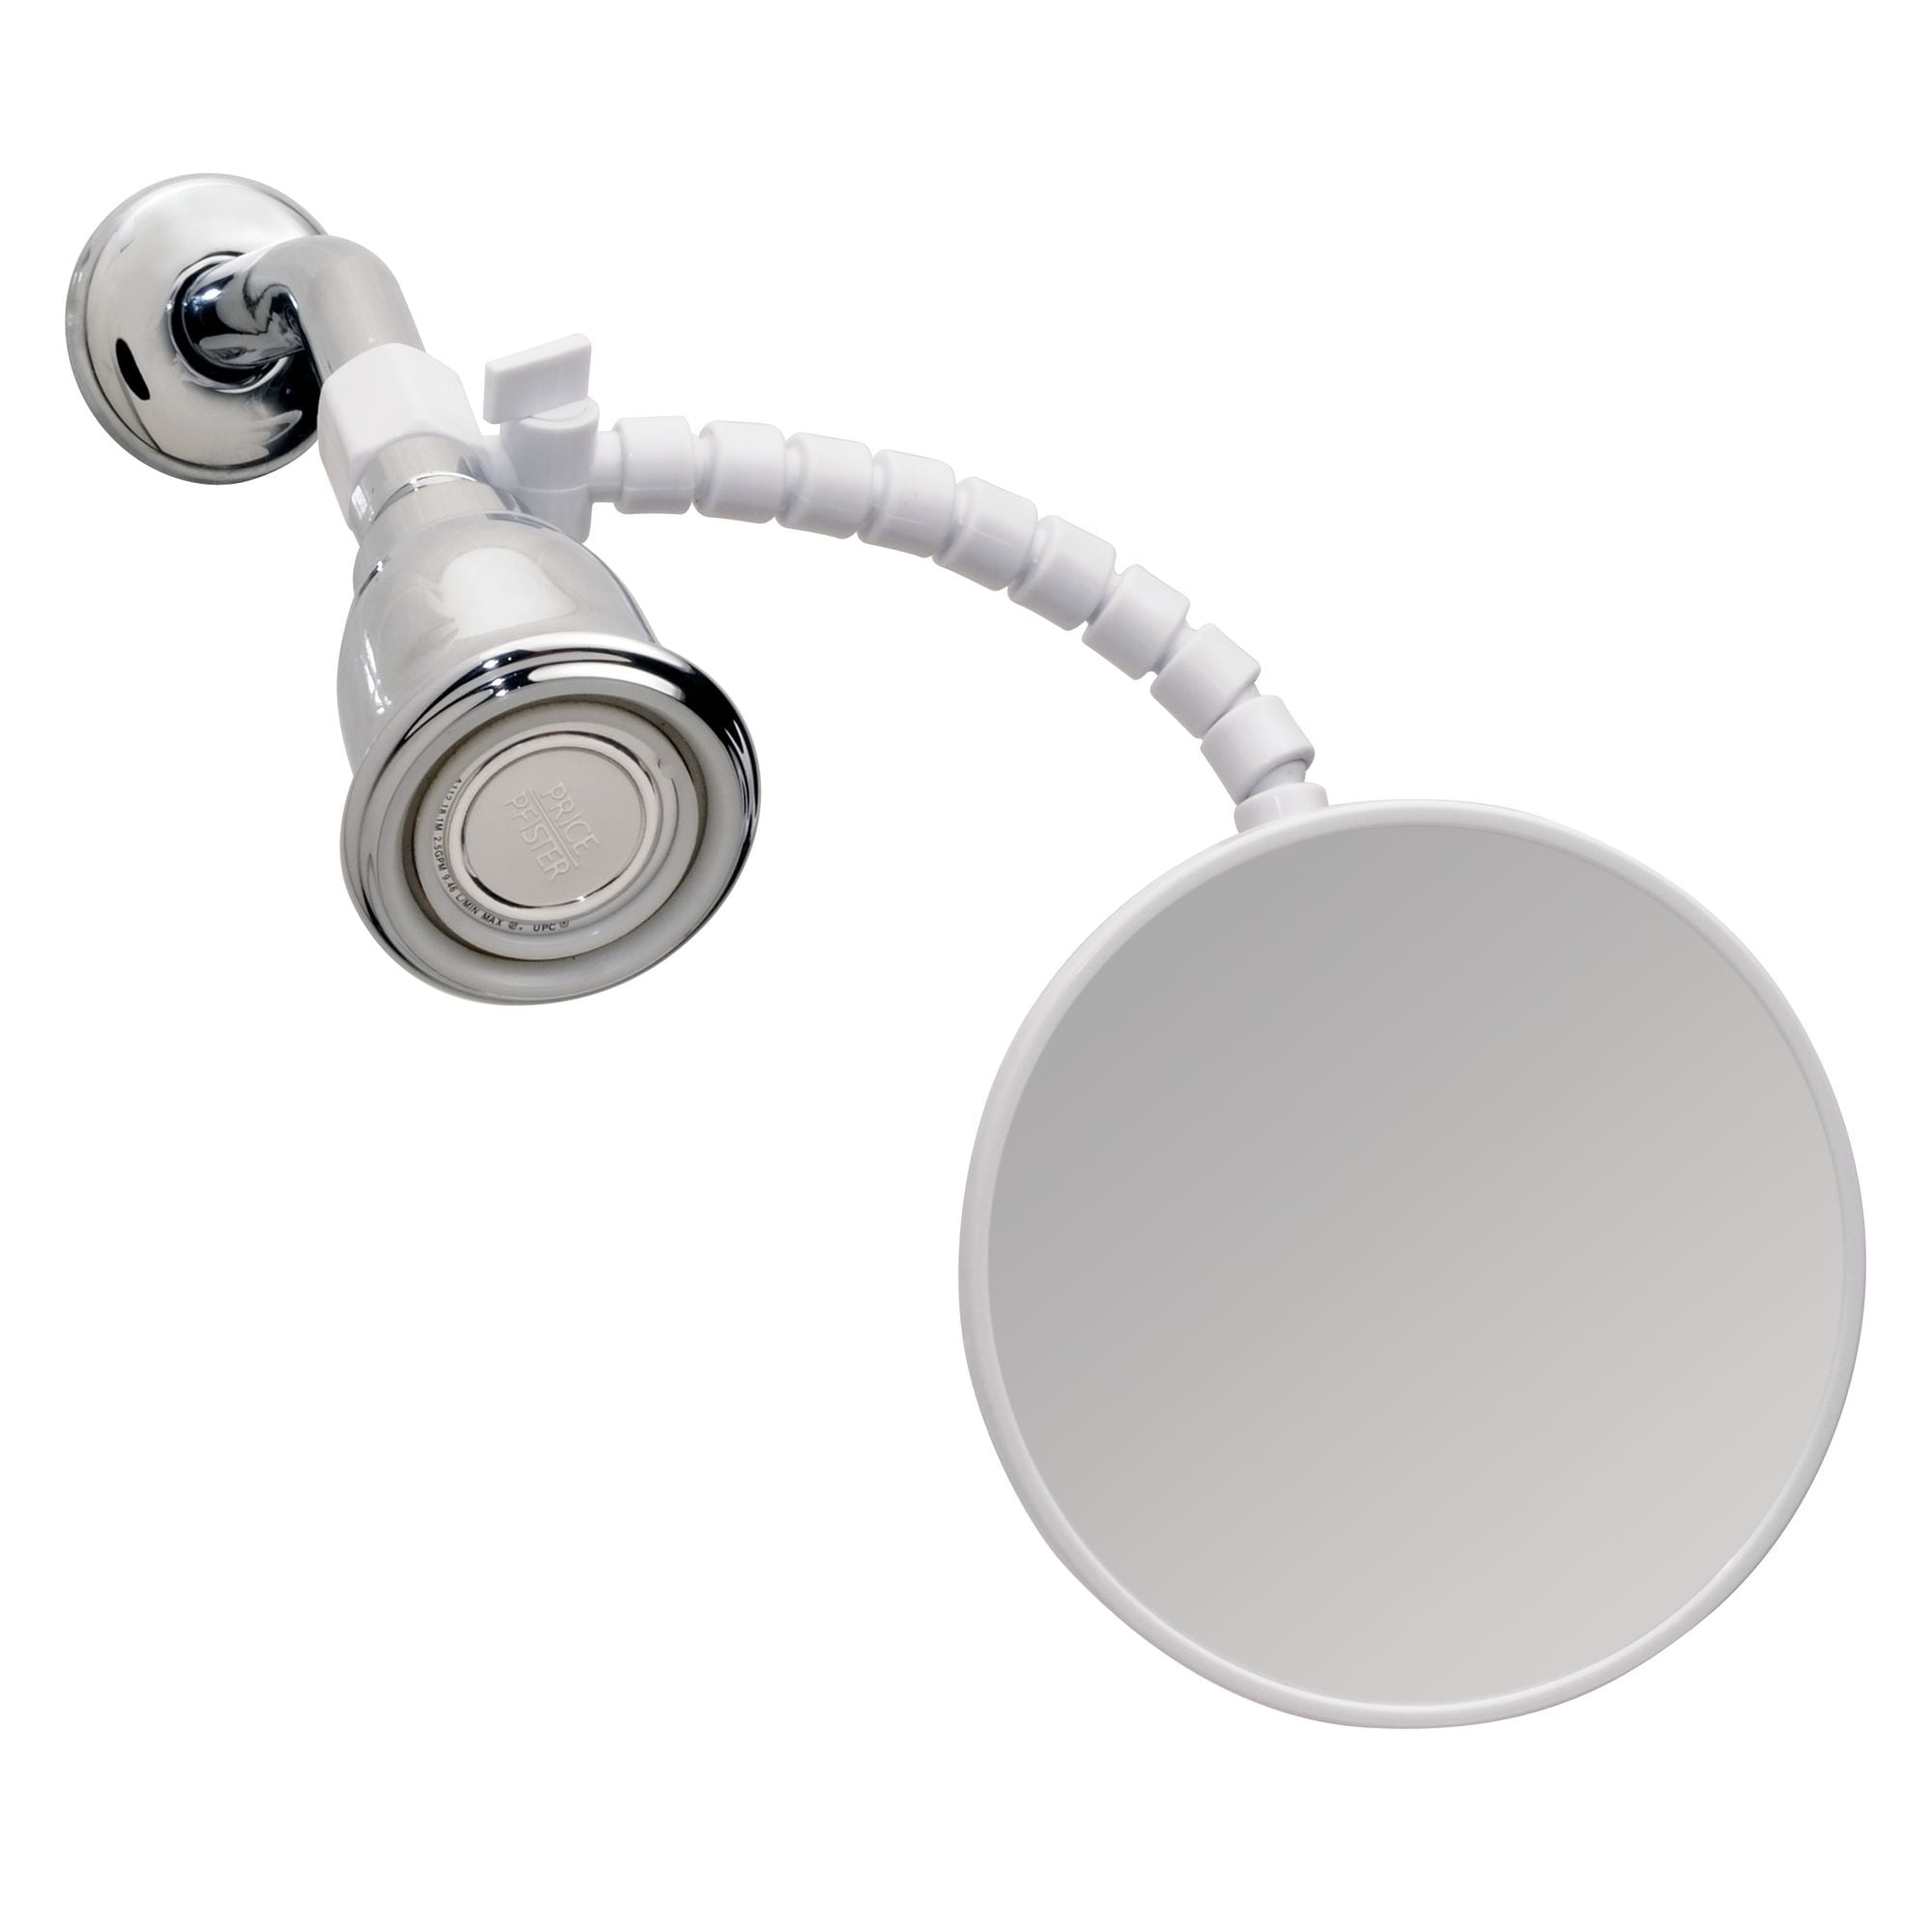 Guaranteed to Never Fog Fogless Shaving Mirror and Shower Head in One Made of Solid Aluminum that Naturally Heats Up Mirror While Showering 2.0 GPM Chrome